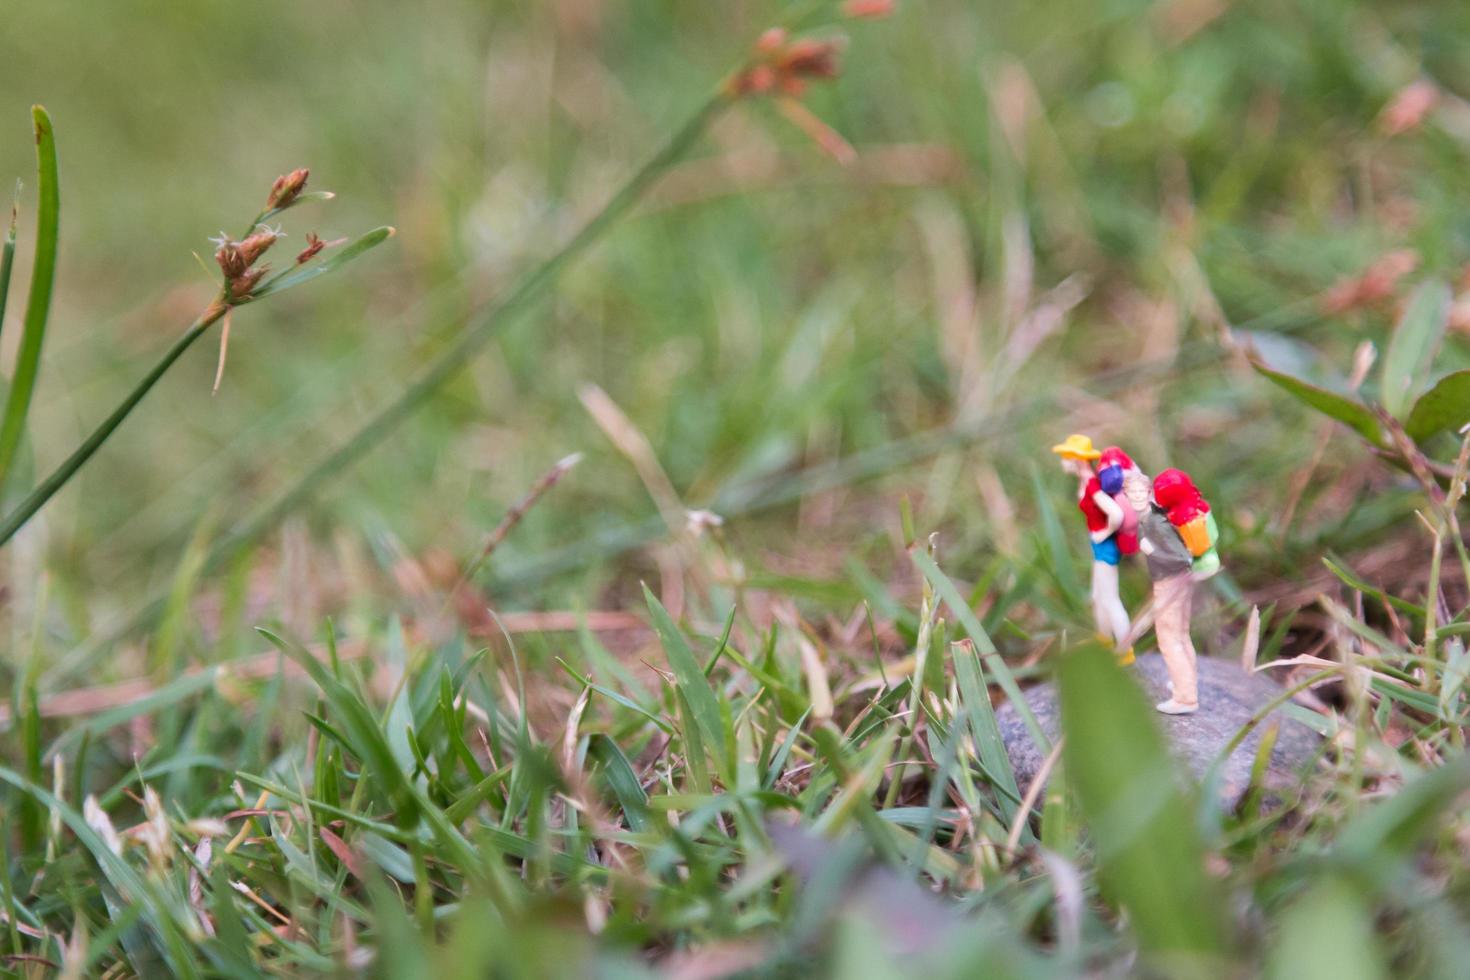 Miniature travelers with backpacks standing and walking in a meadow photo